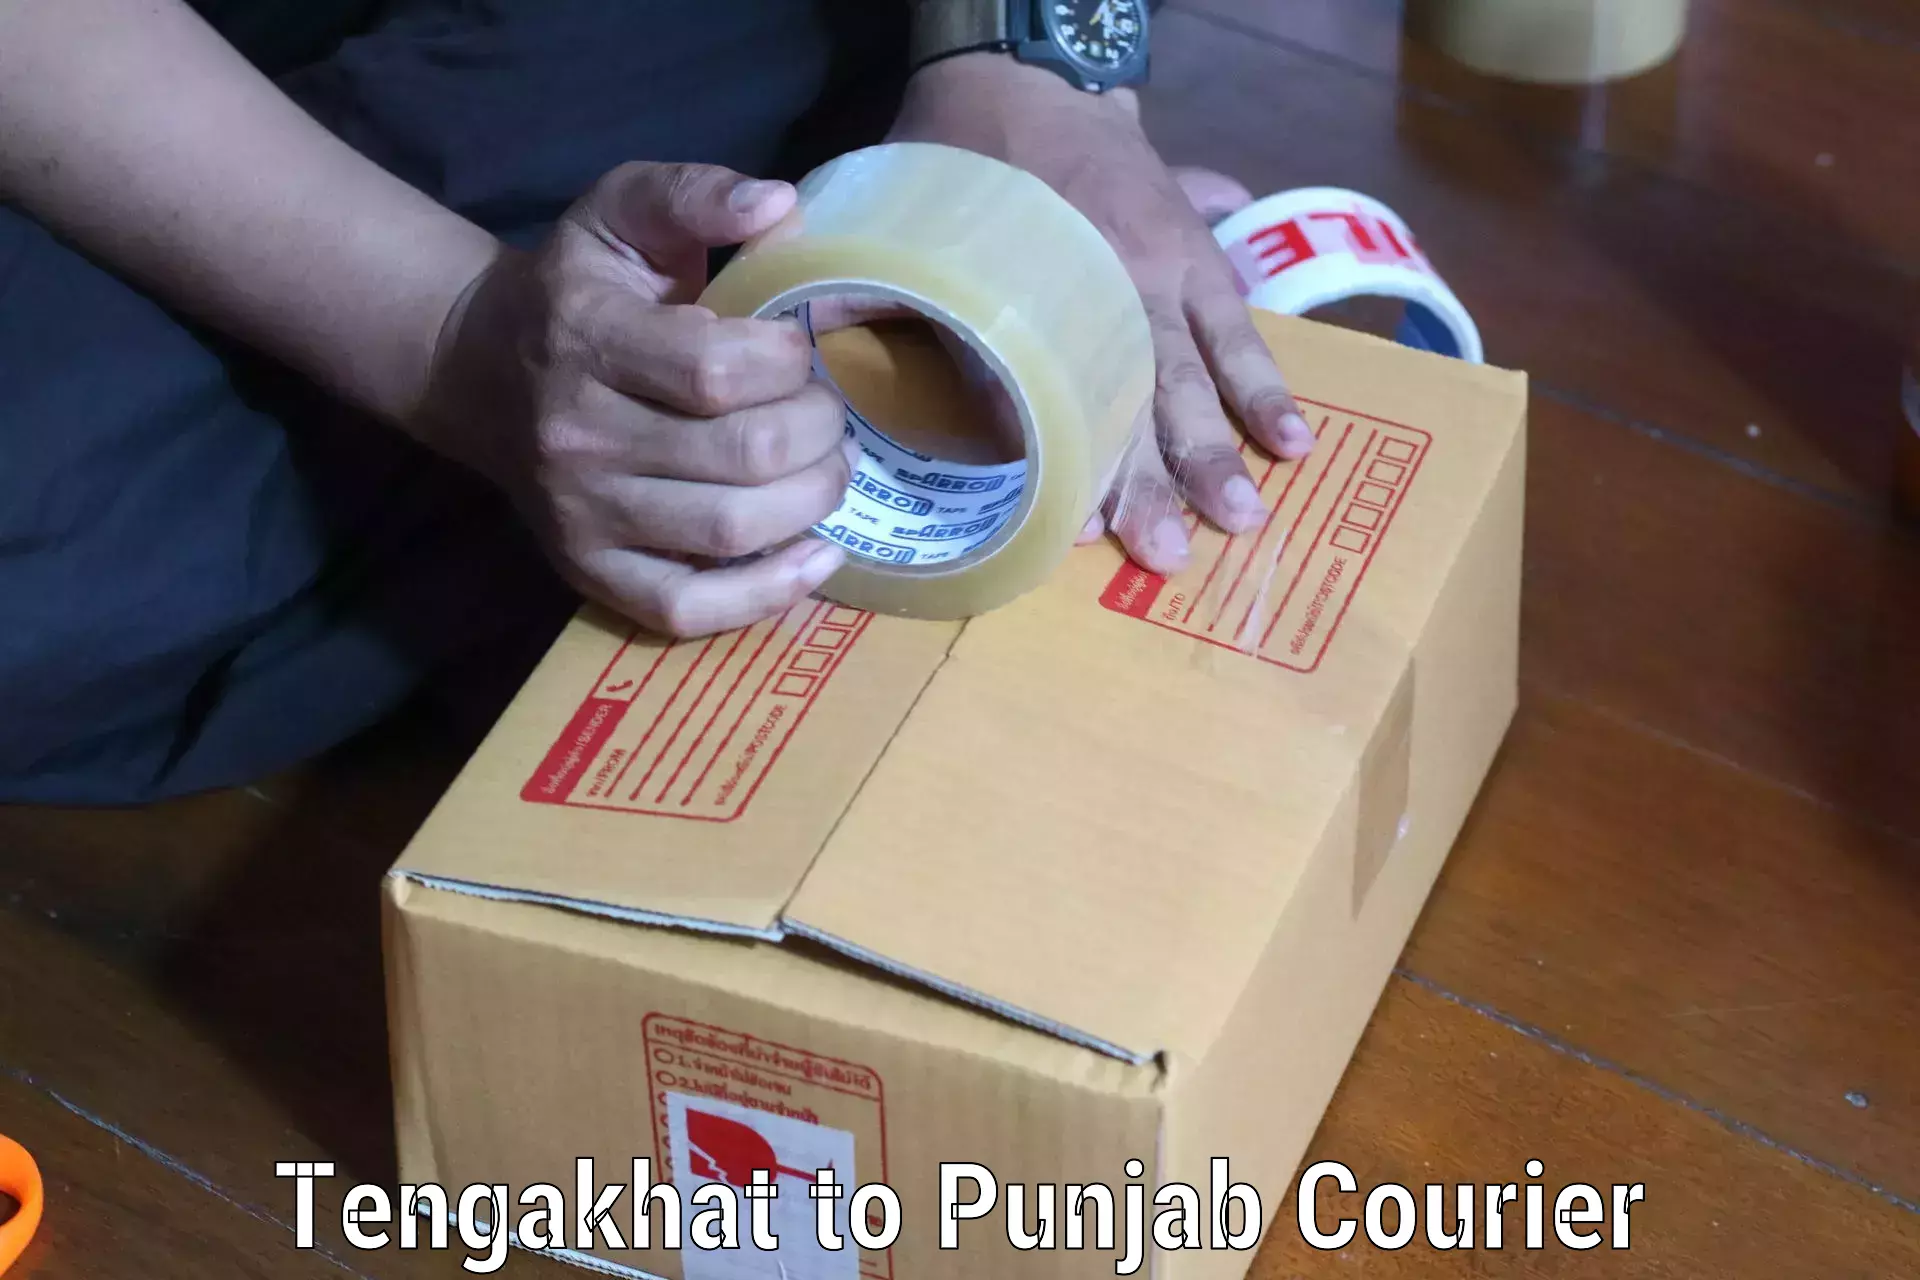 Online shipping calculator in Tengakhat to Amritsar